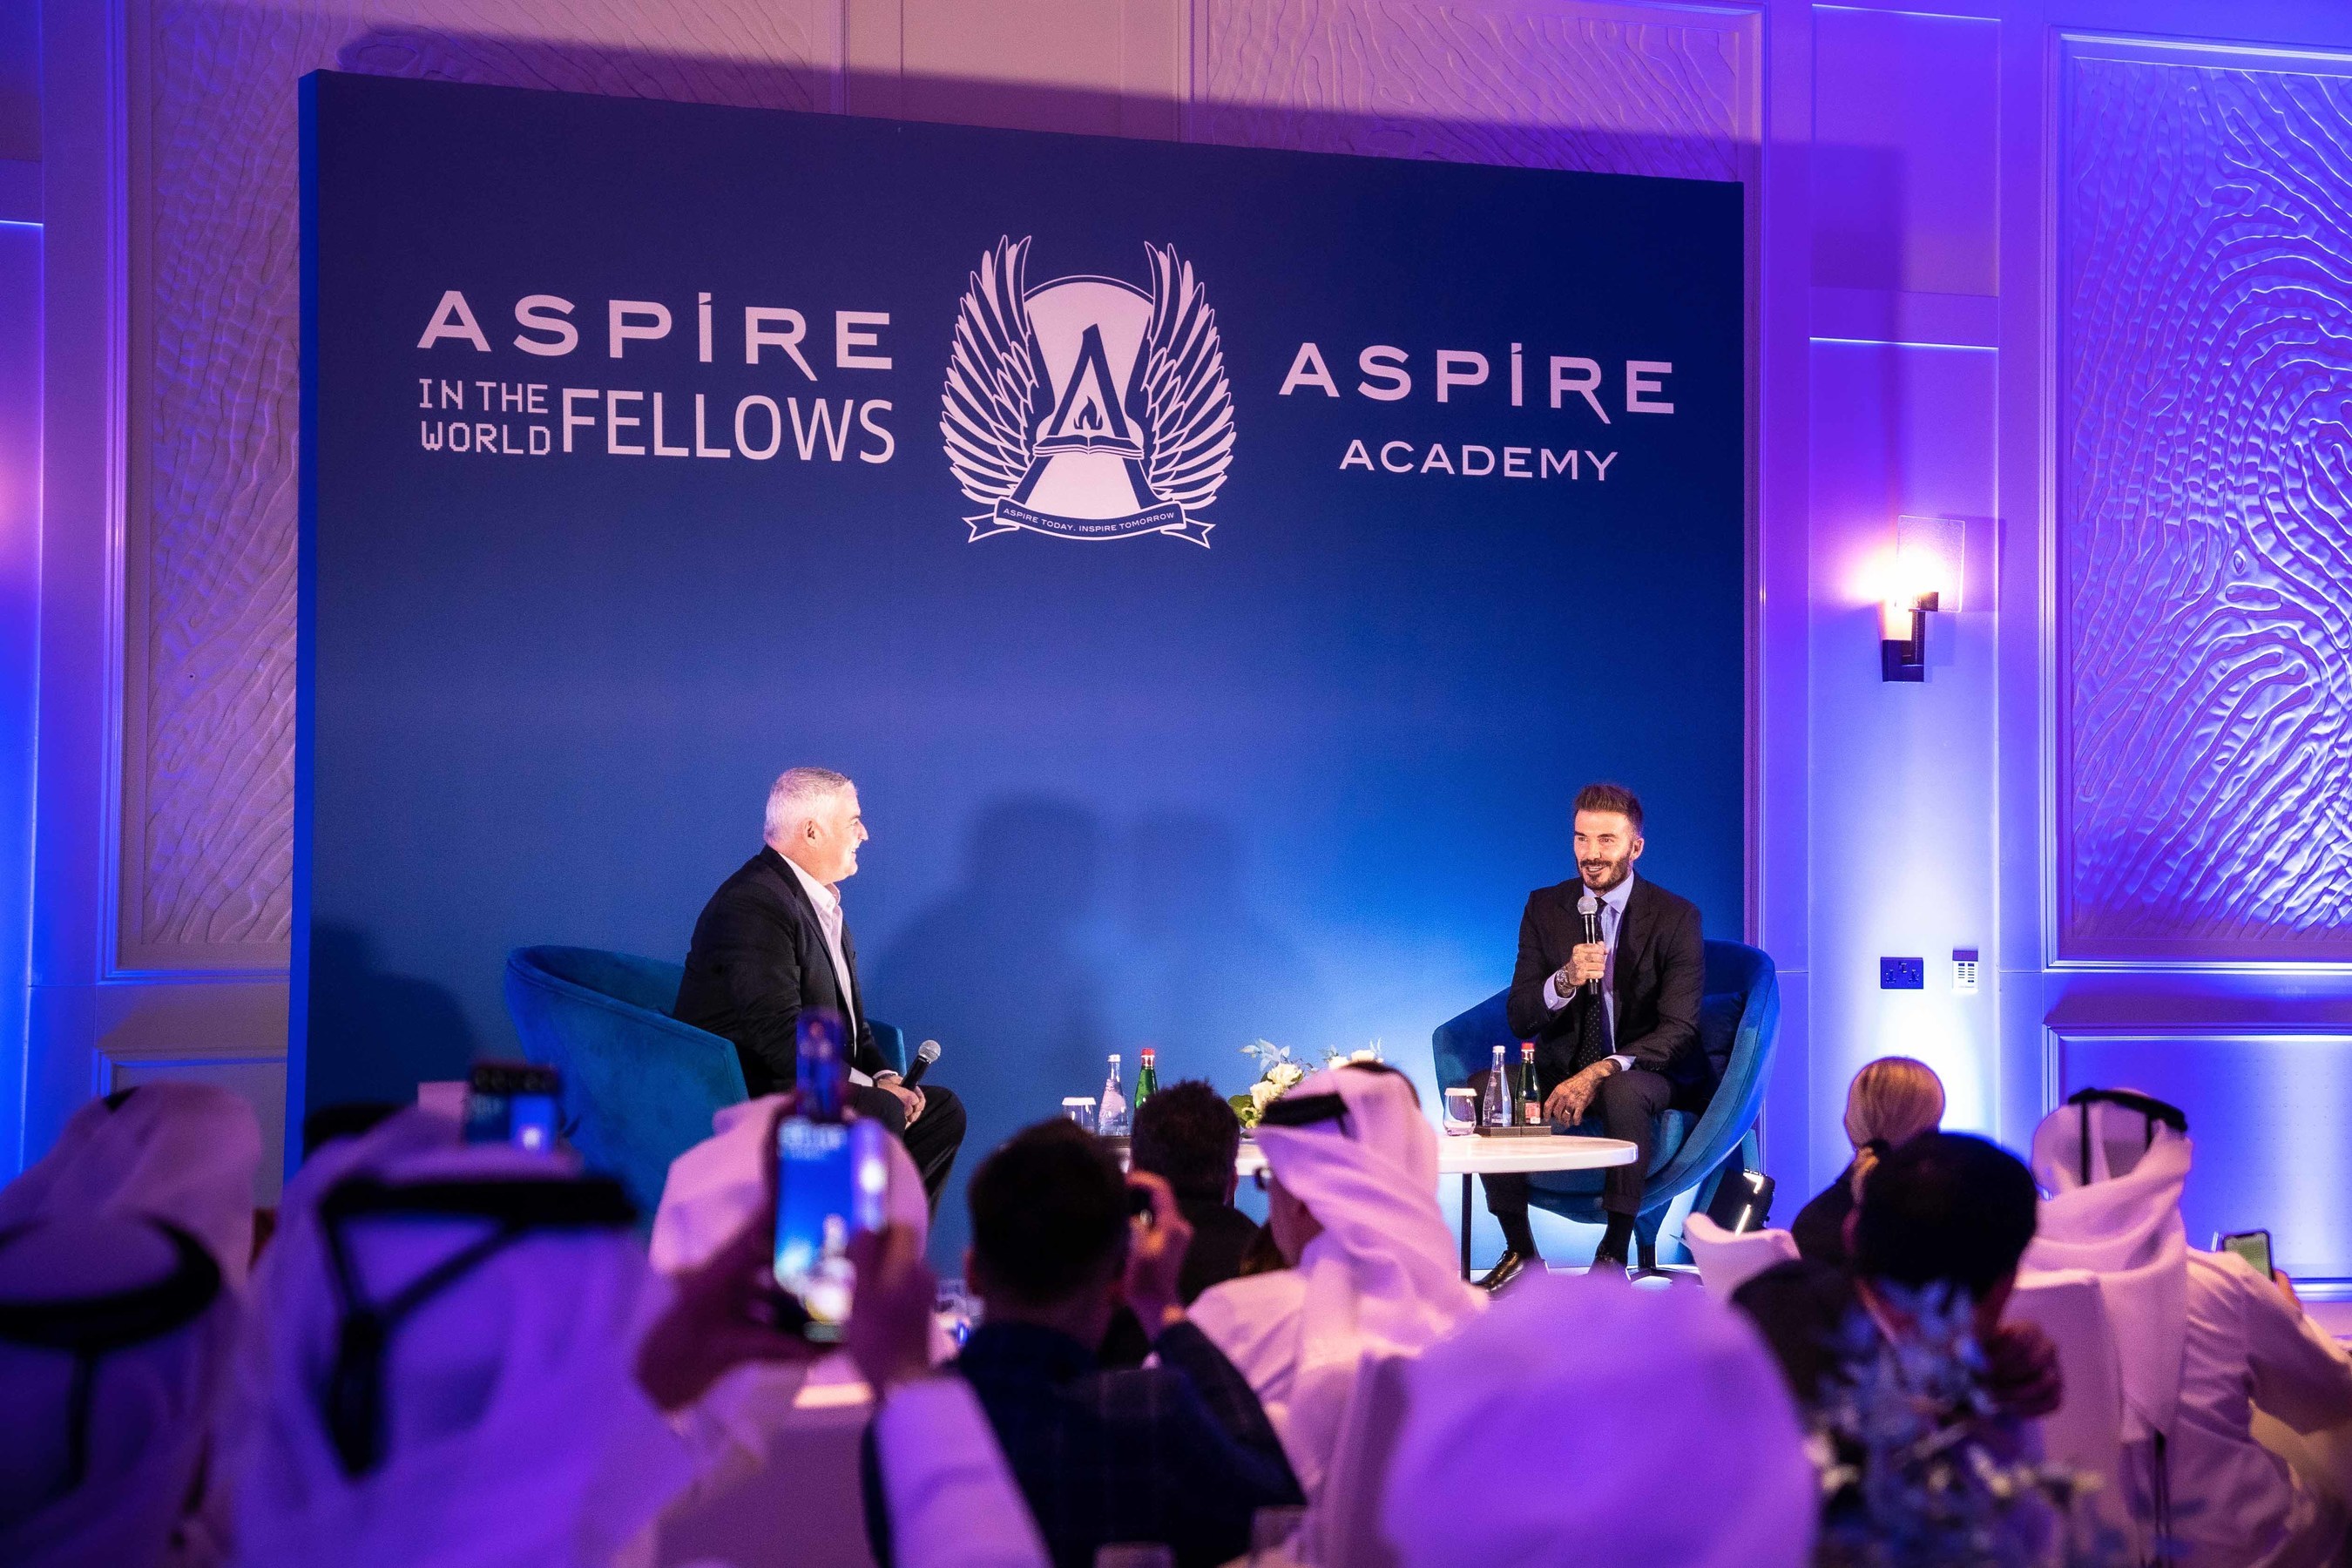 Infantino and Beckham Hail Aspire Academy as Integral to Qatar’s World Cup Legacy as Global Summit 2022 Ends (PRNewsfoto/Aspire Academy)